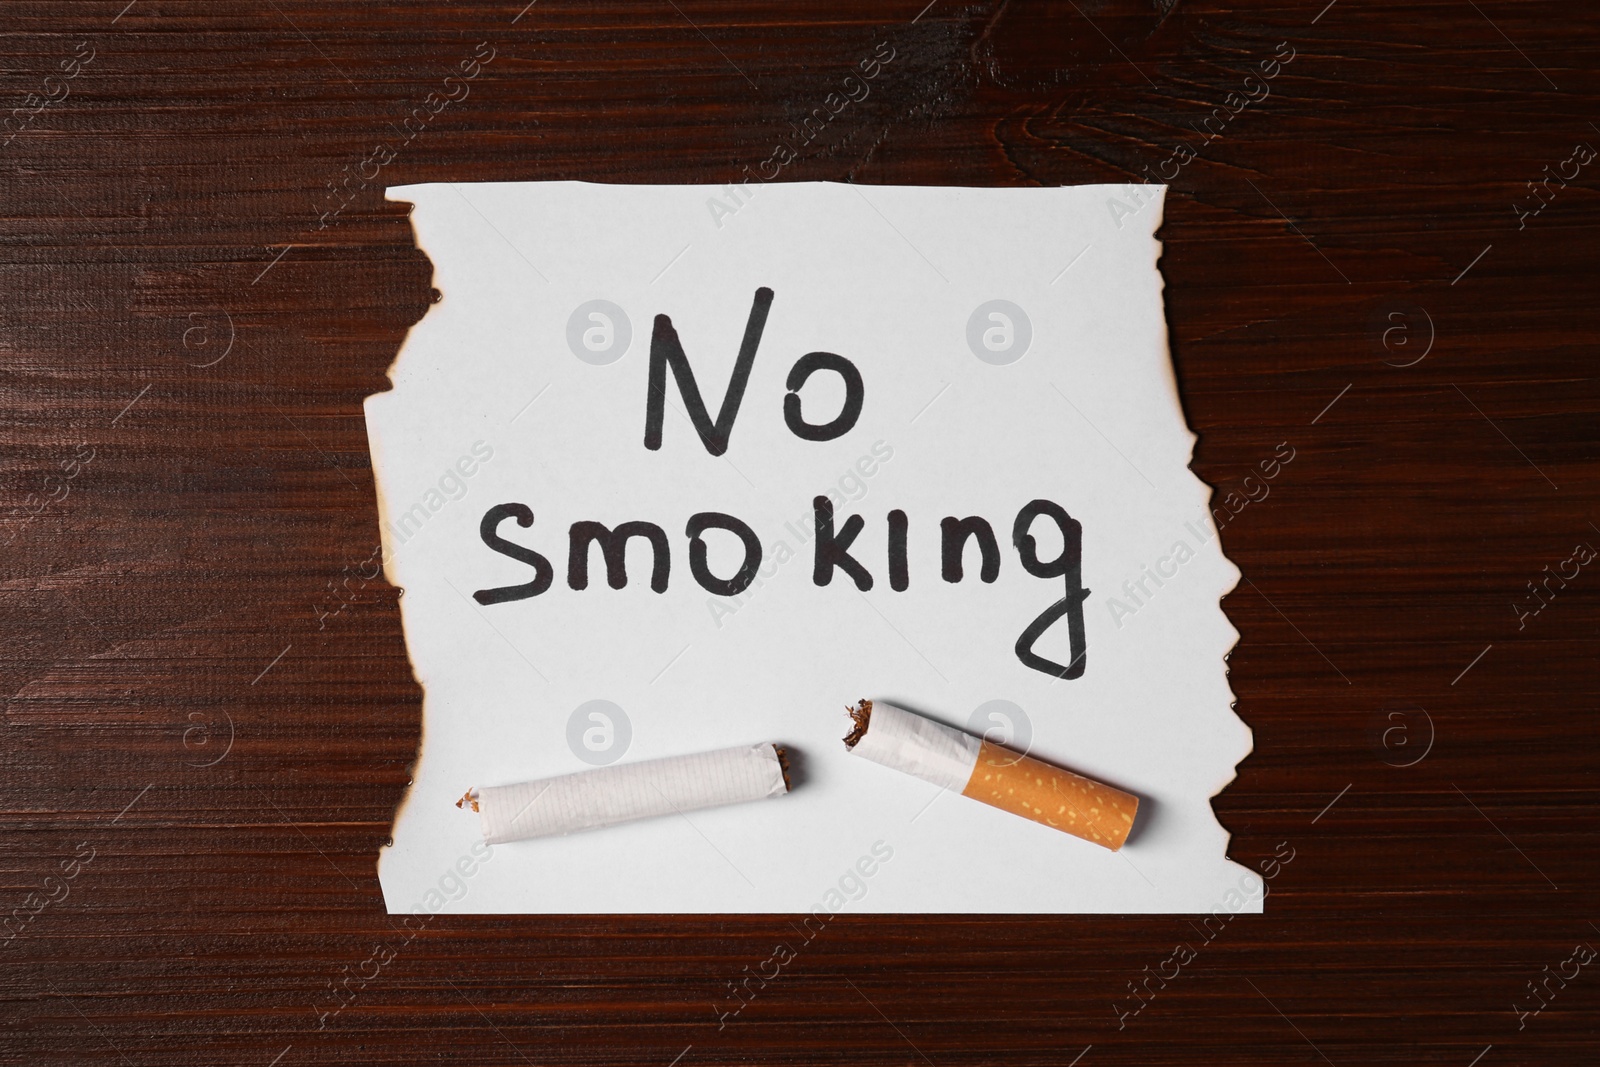 Photo of Broken cigarette and words No Smoking written on paper on wooden table, top view